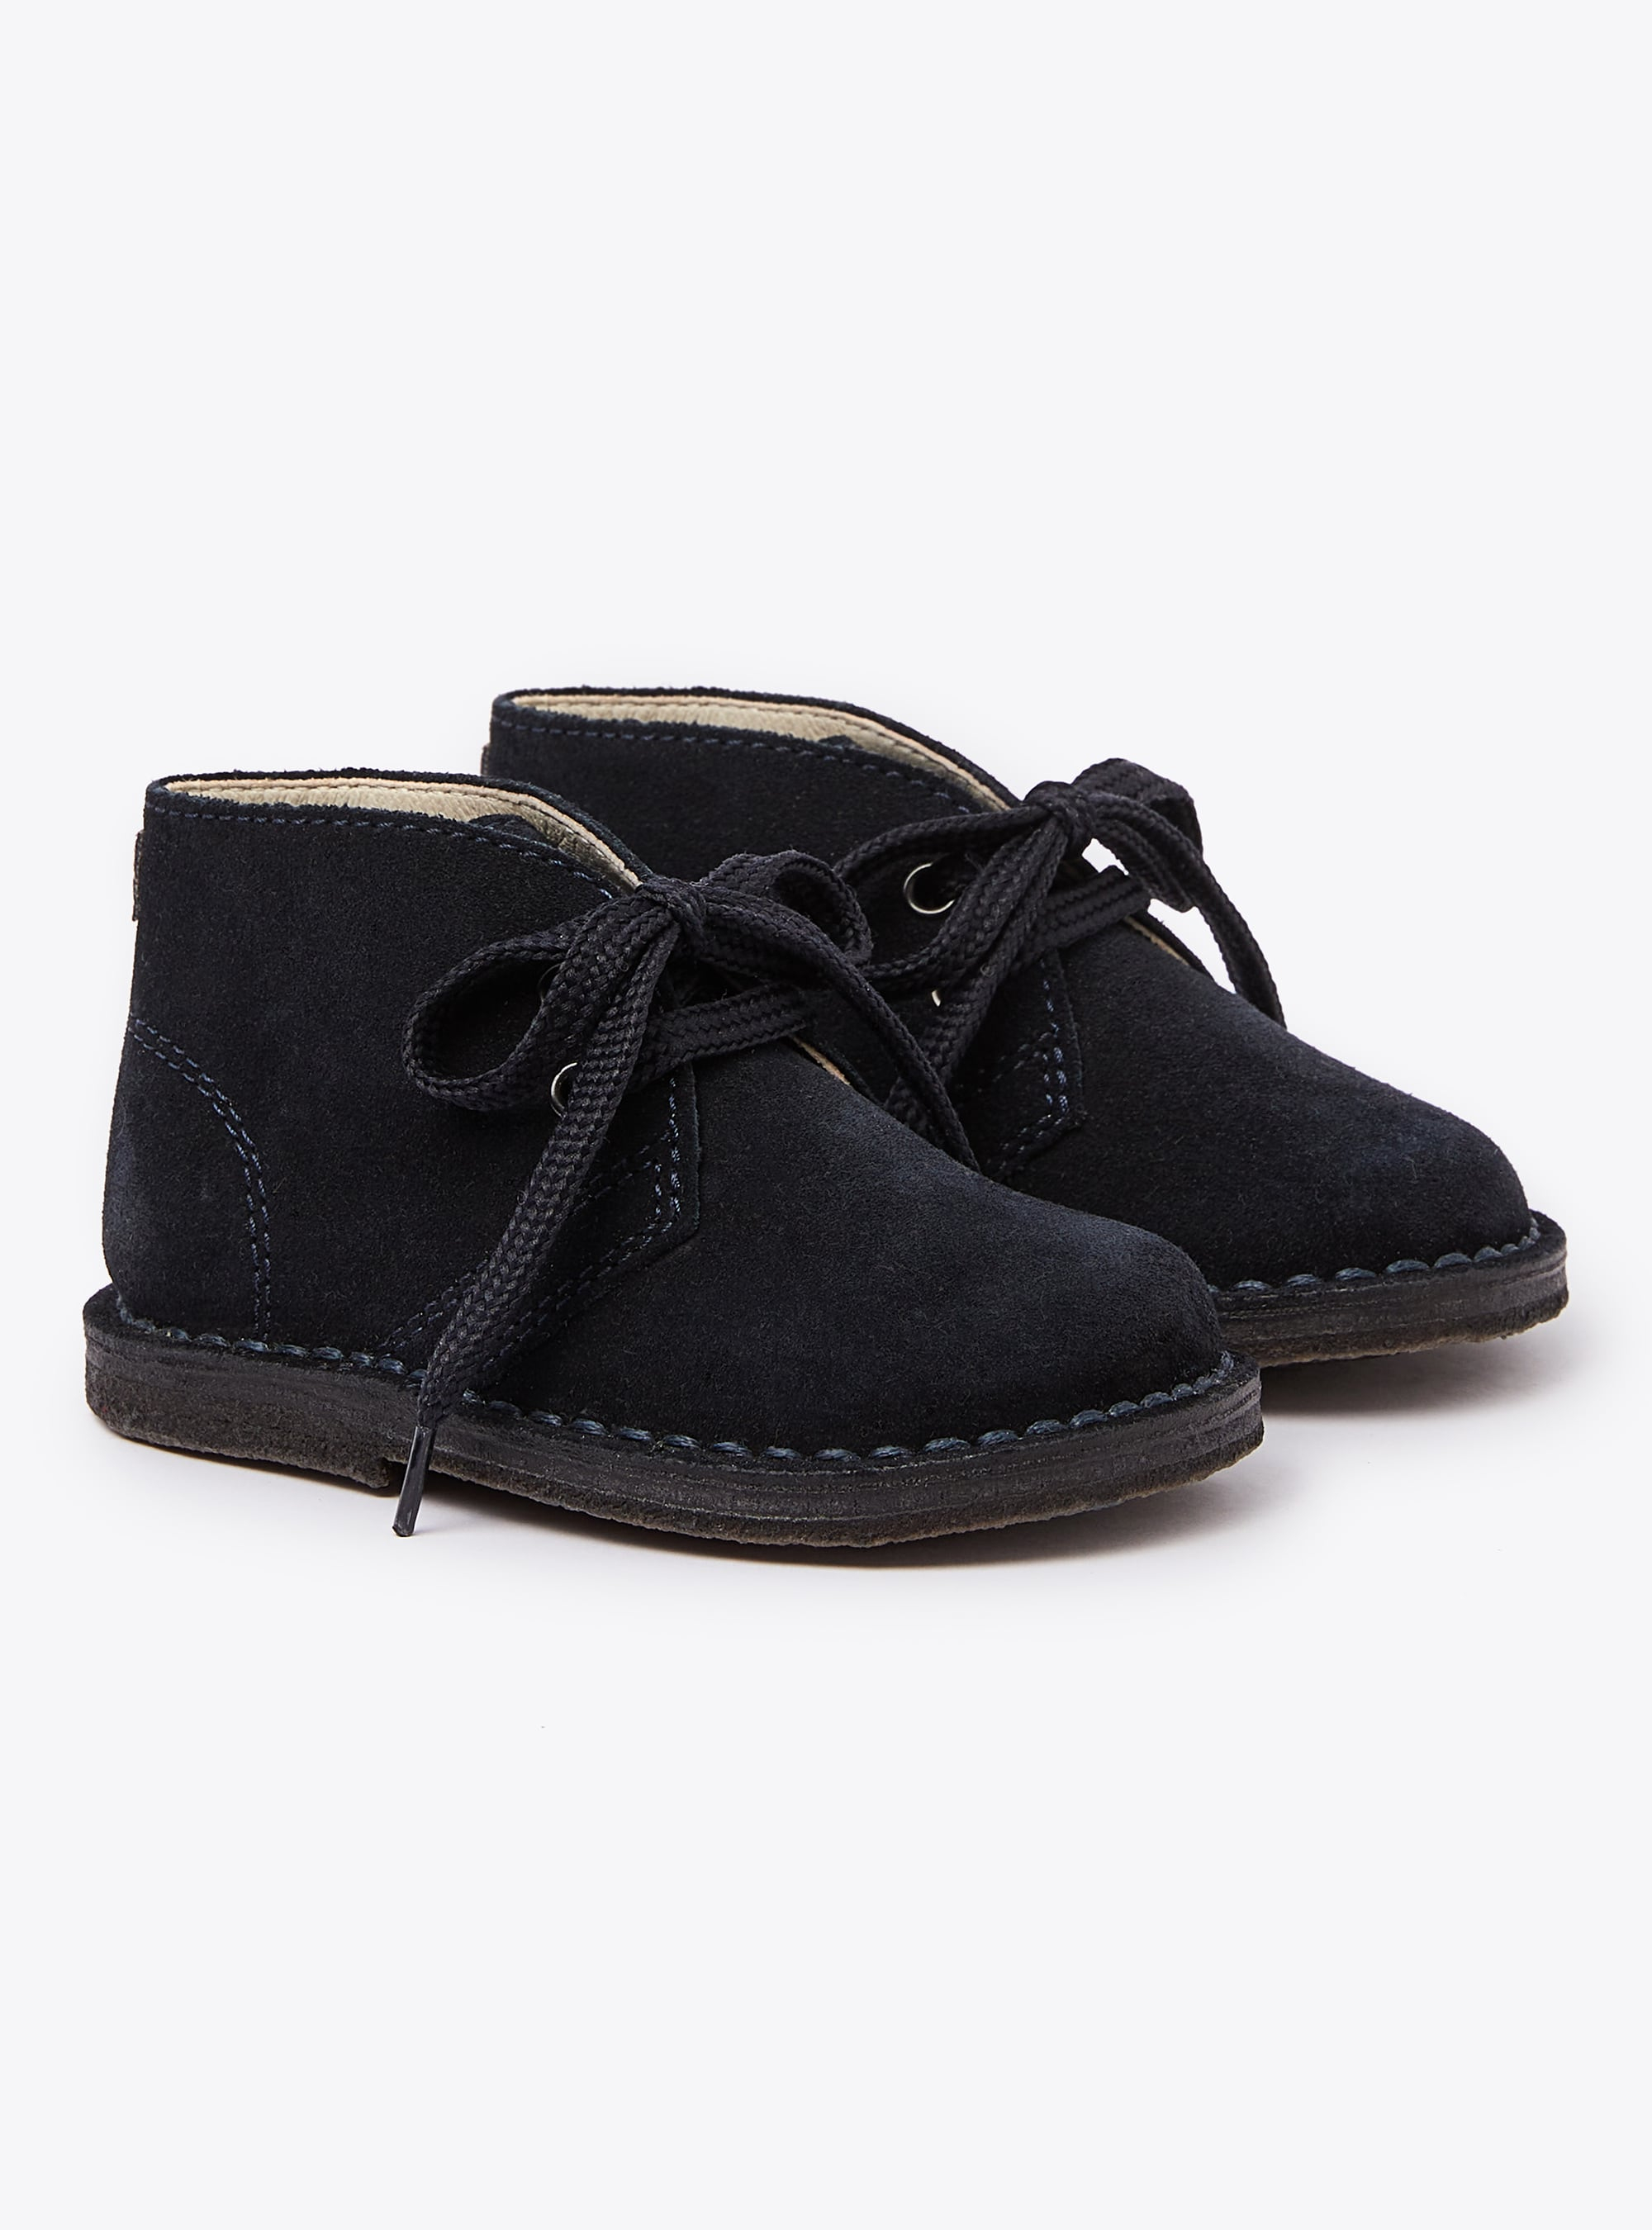 Navy suede baby shoes - Shoes - Il Gufo